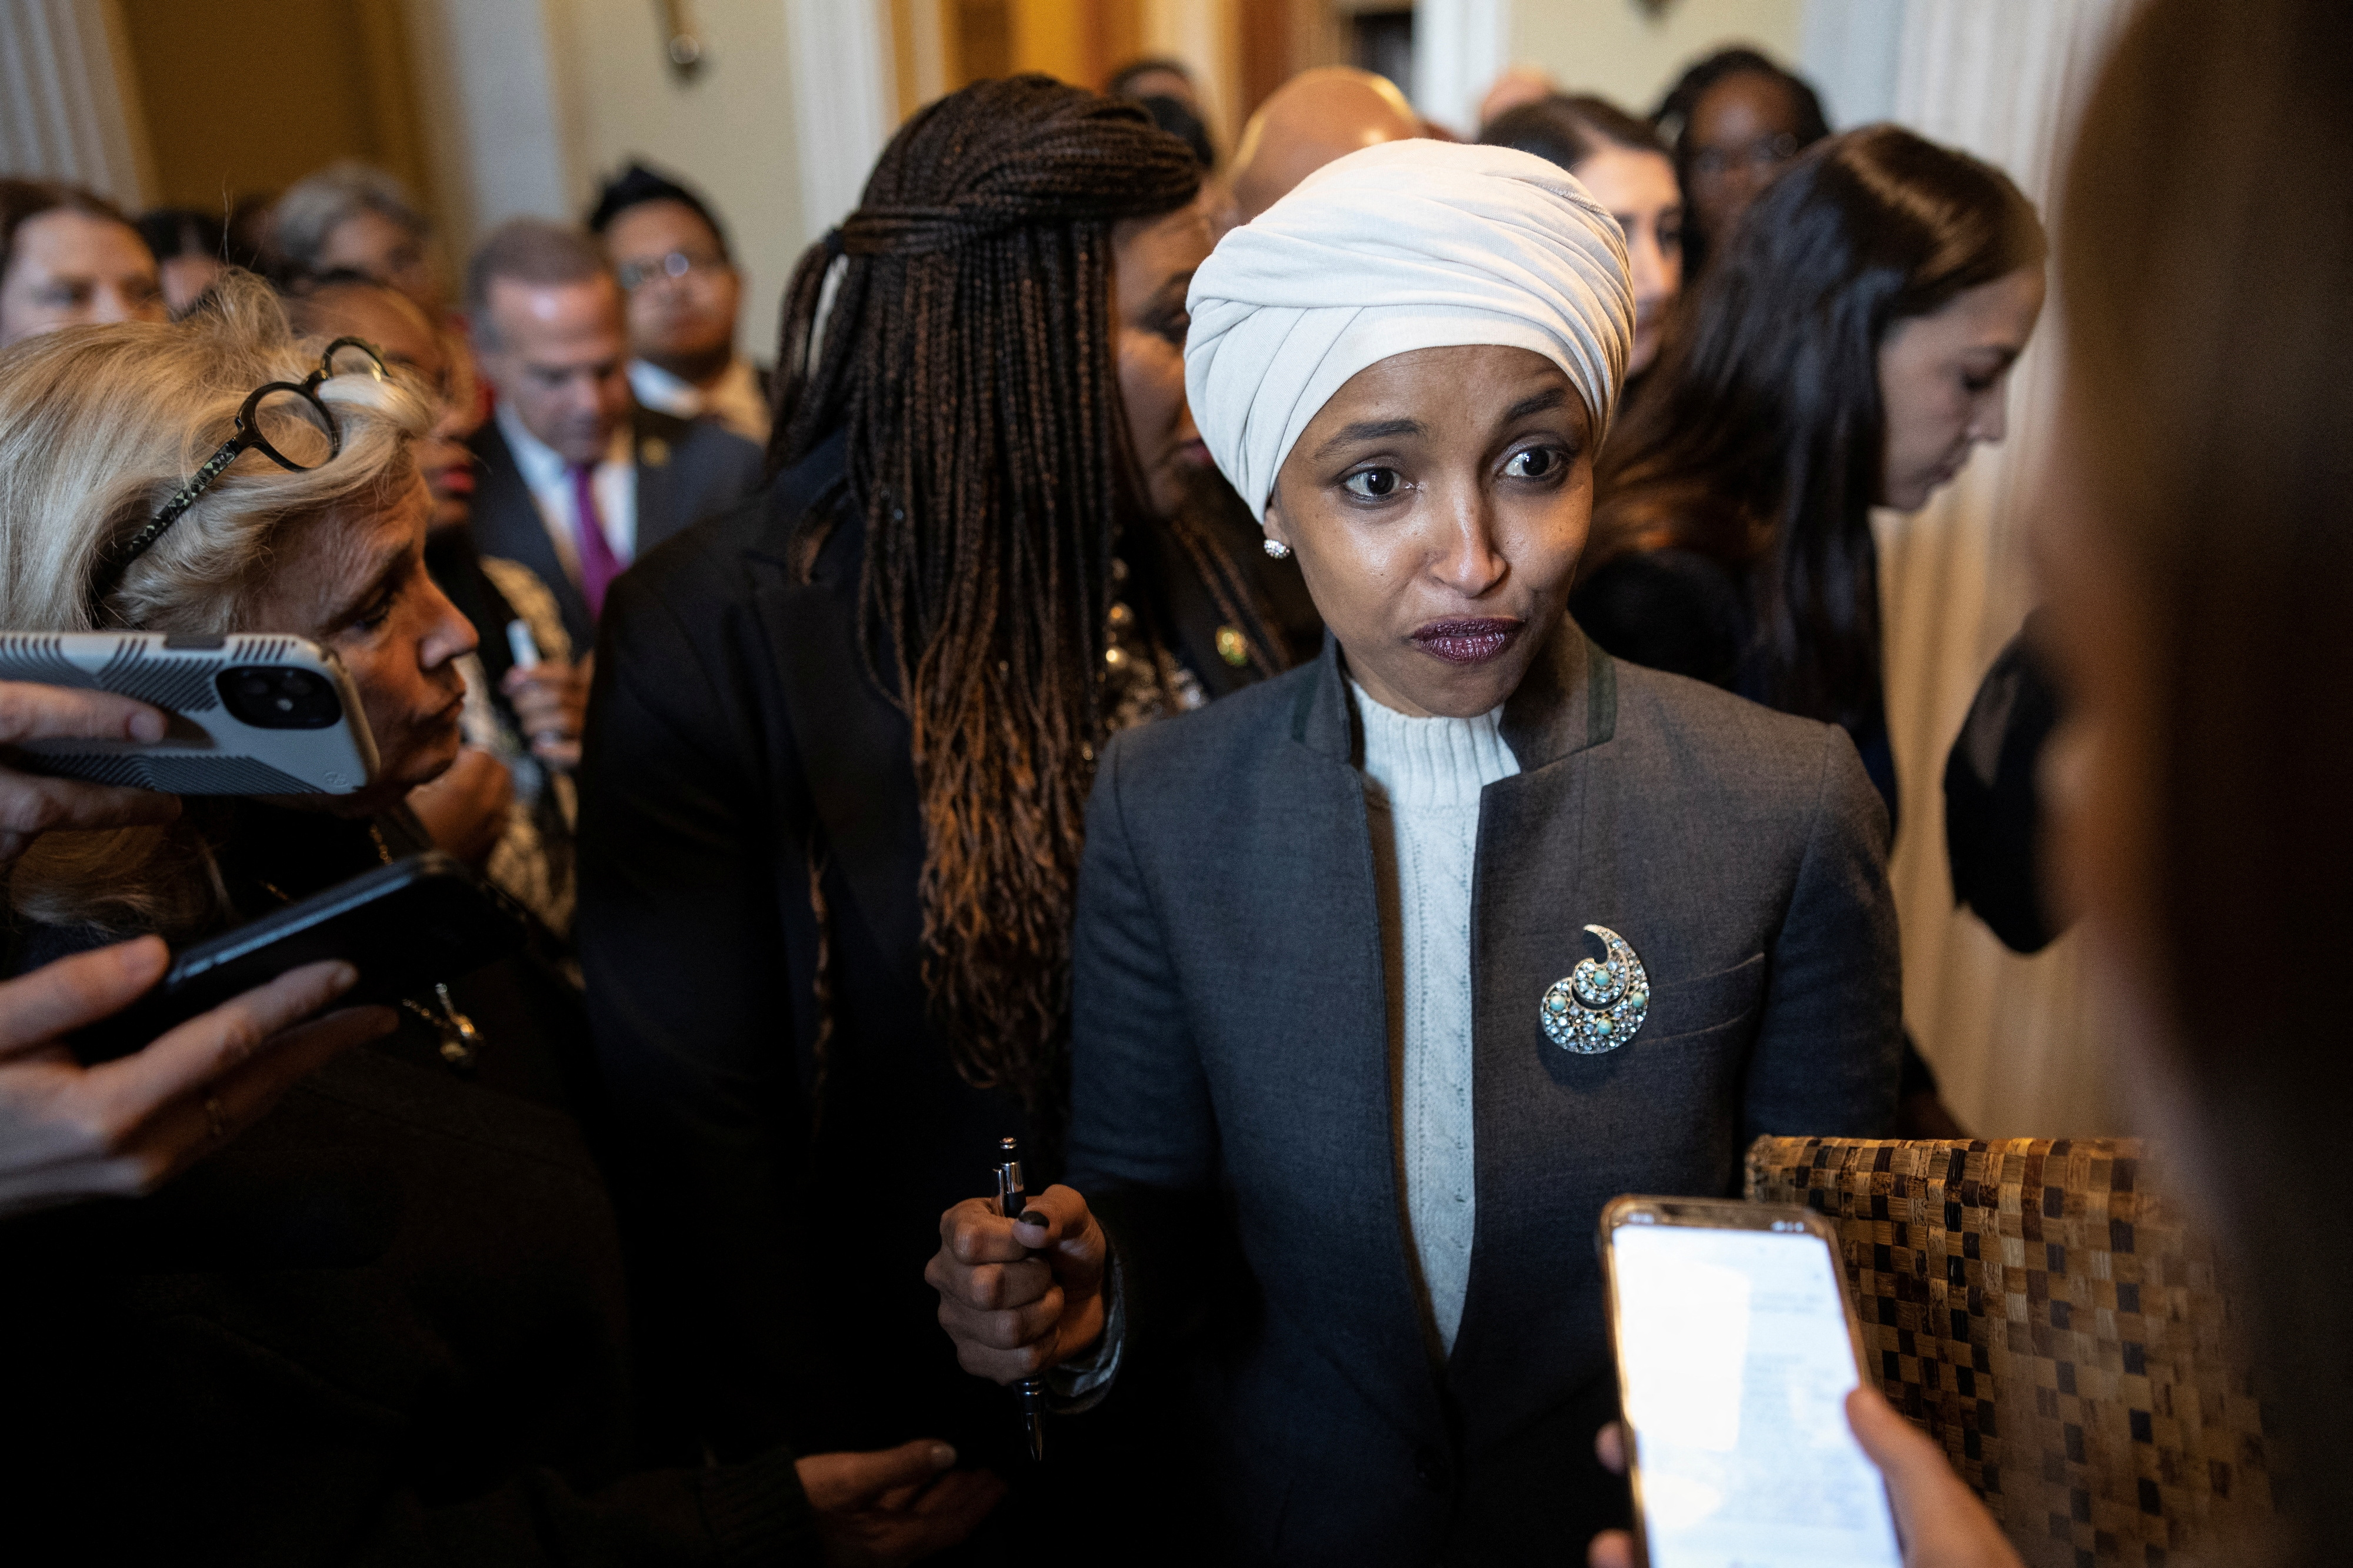 Rep. Omar was ousted by Republicans to serve on the House Foreign Affairs Committee on Capitol Hill